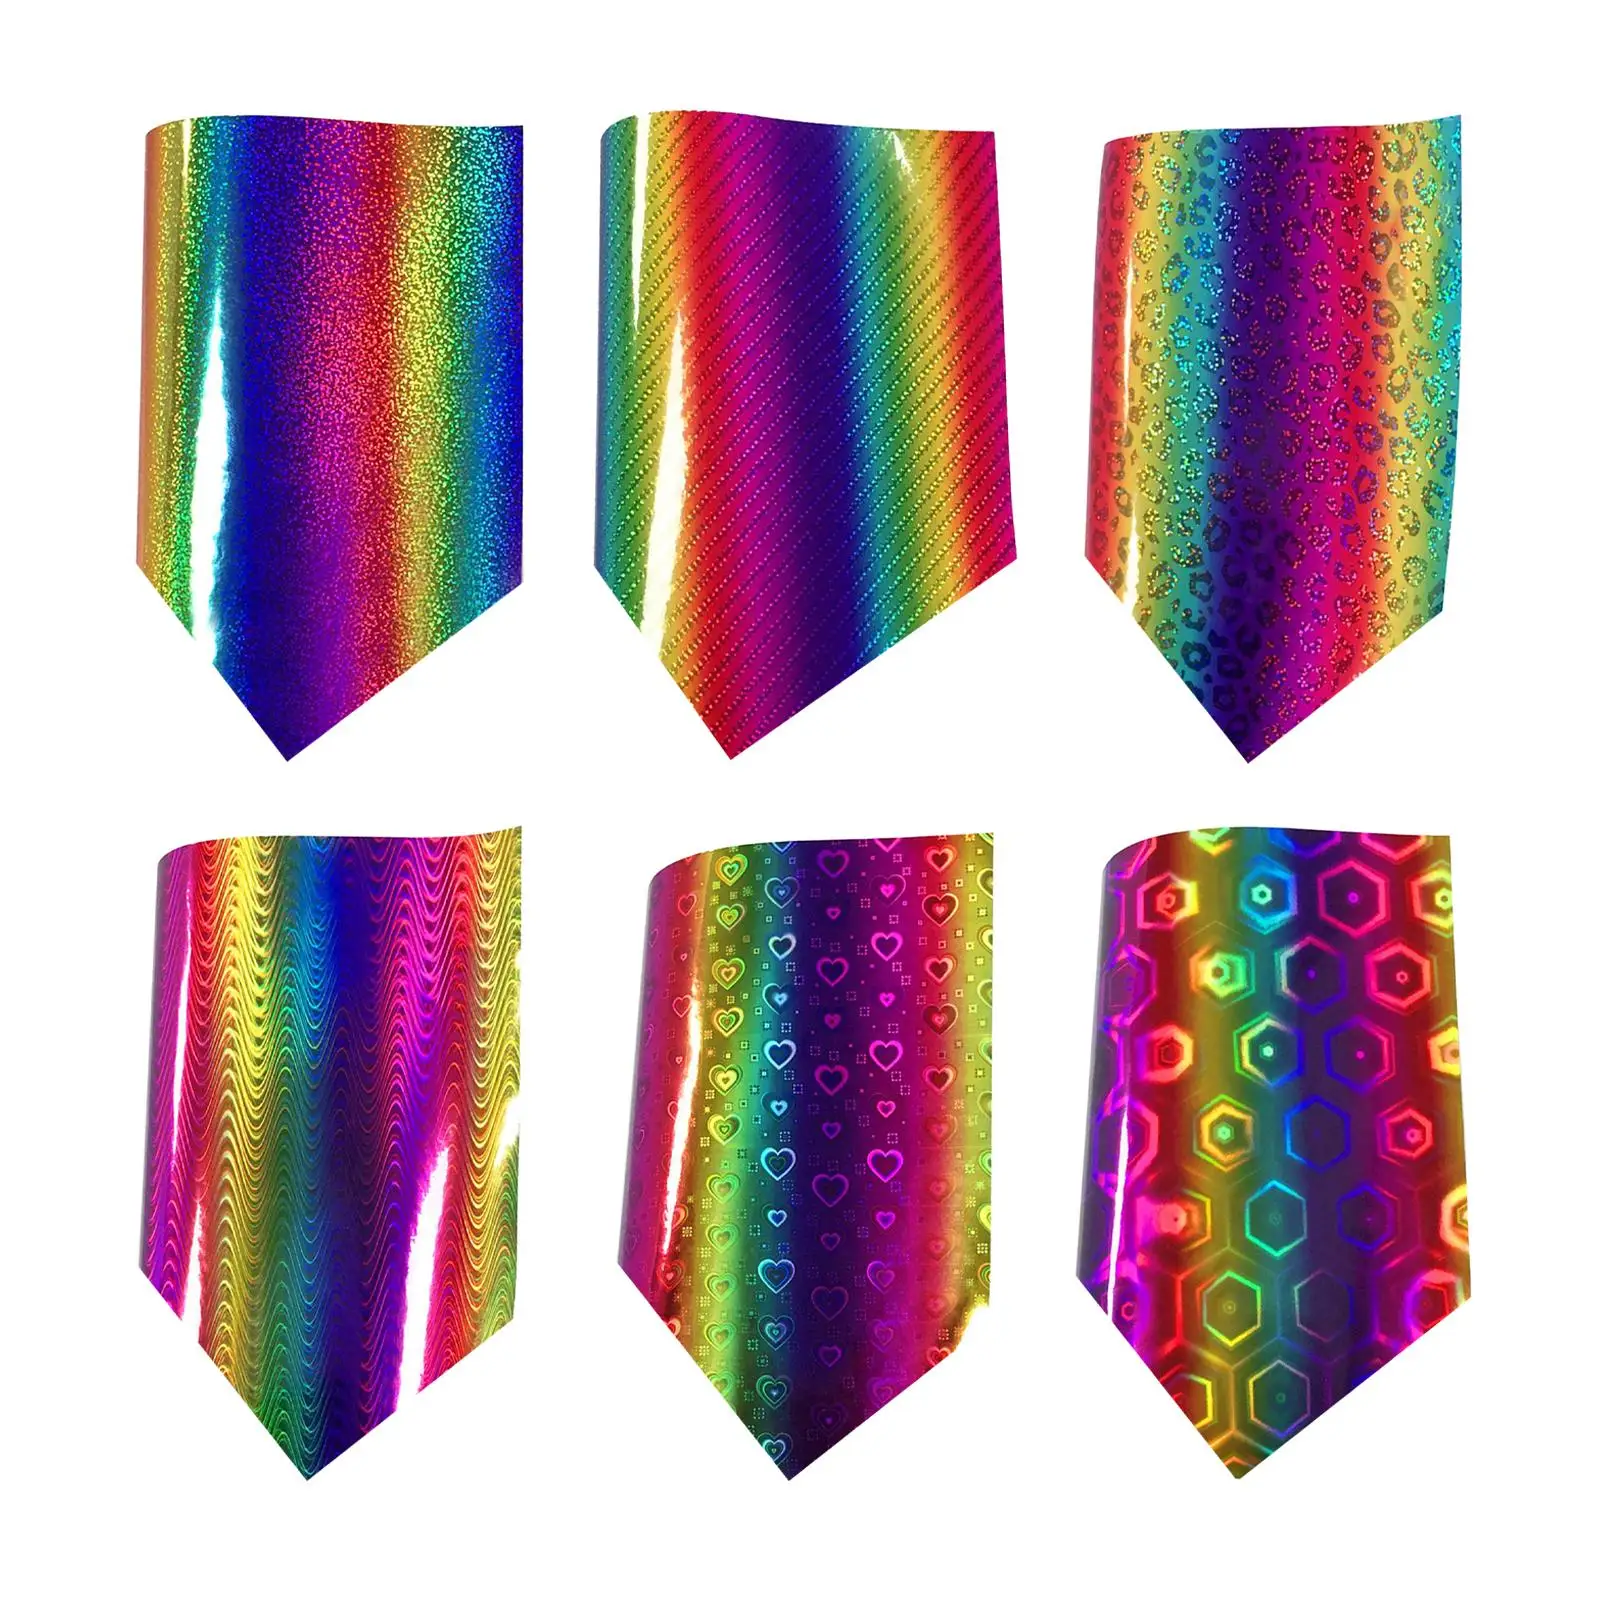 Holographic Heat Transfer Vinyl 12 x 12 inch Decorative Vinyl Htv for T Shirts DIY Clothes and Other Fabric Bags Decoration